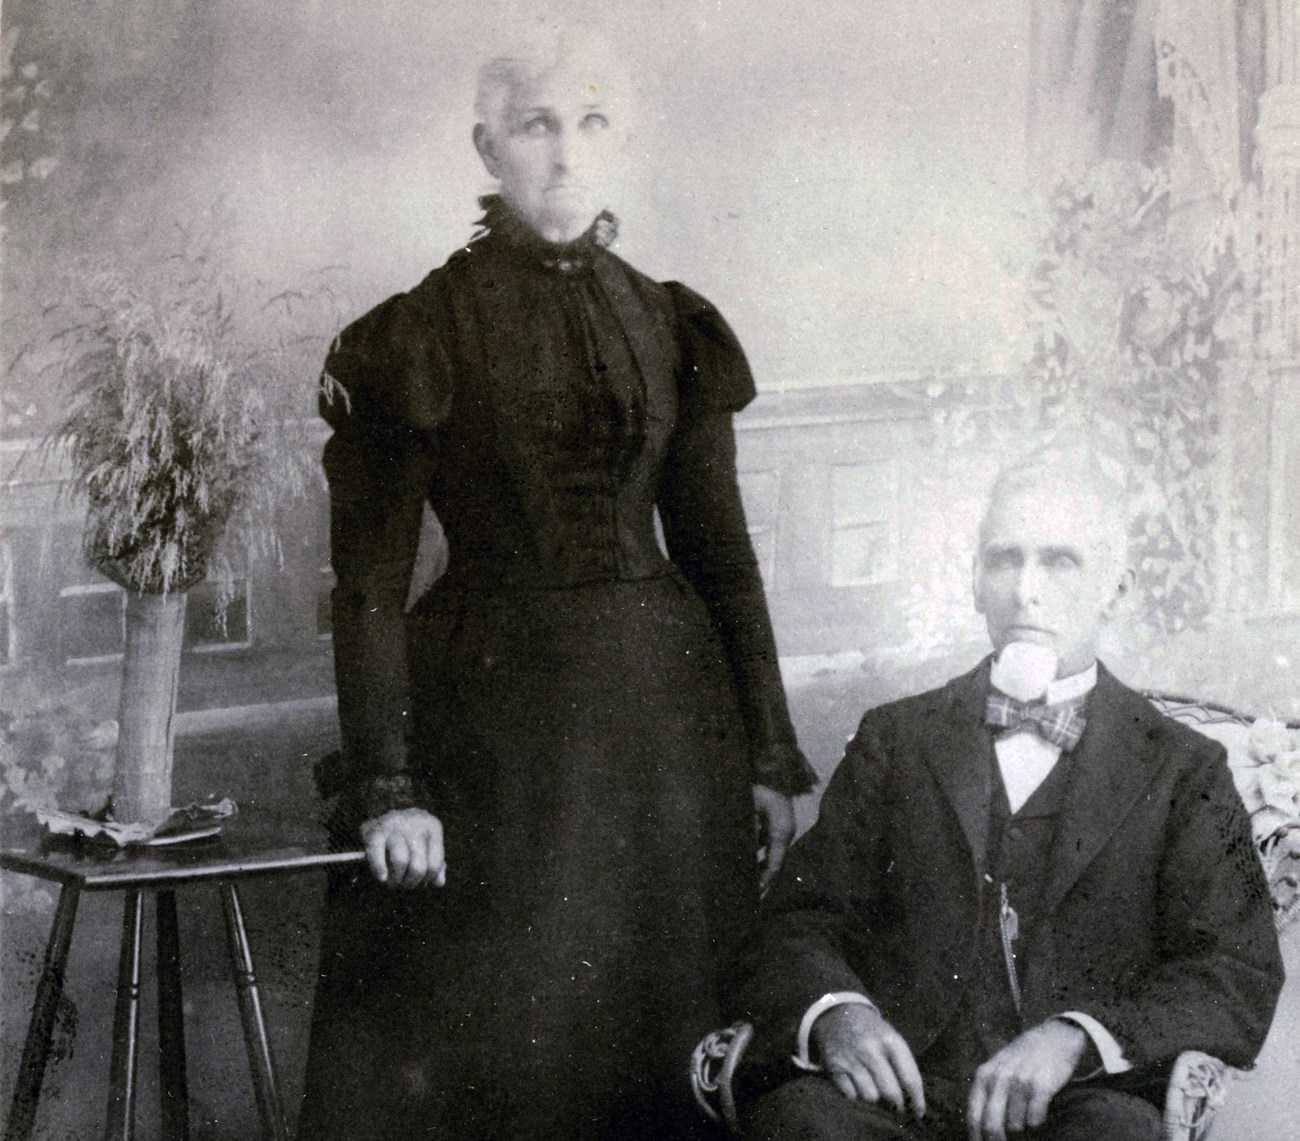 Woman in high-neck black dress stands in portrait next to seated man in suit.